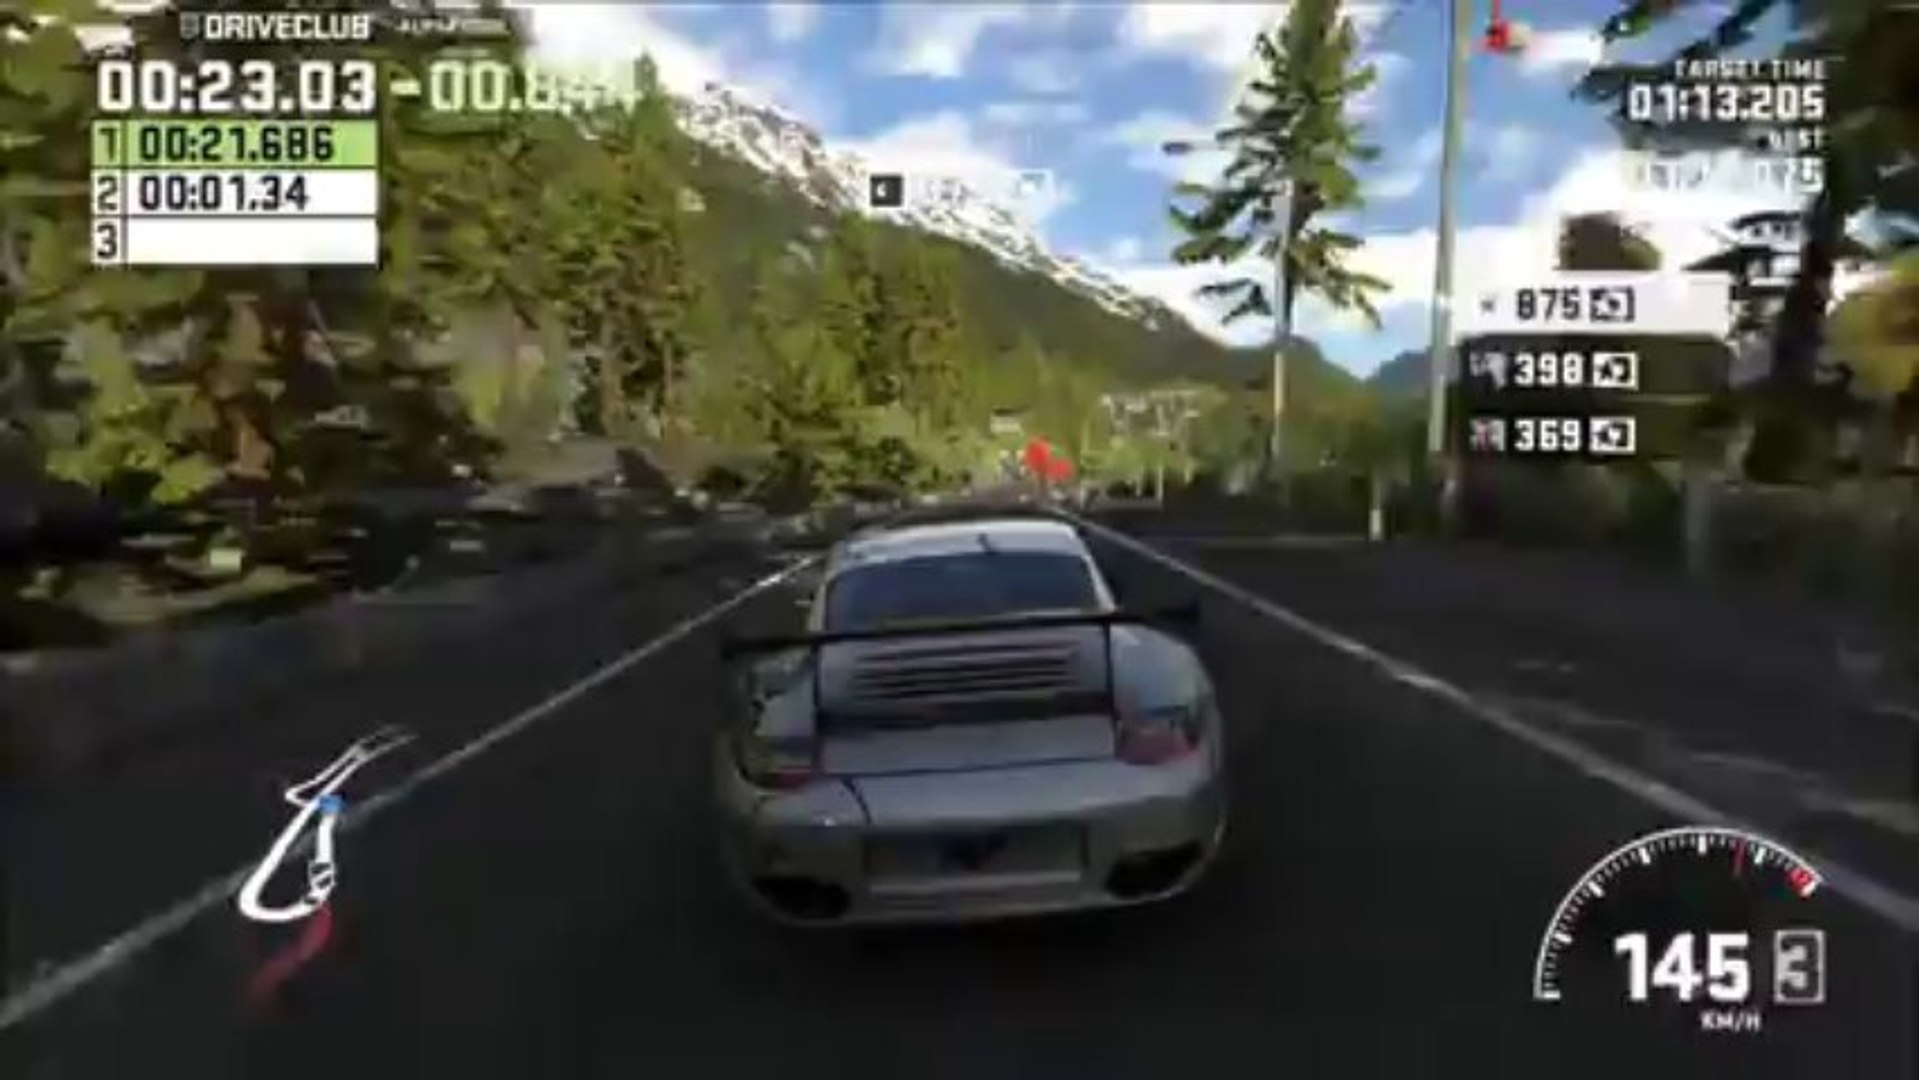 DriveClub PS4 - Gameplay Video - video Dailymotion